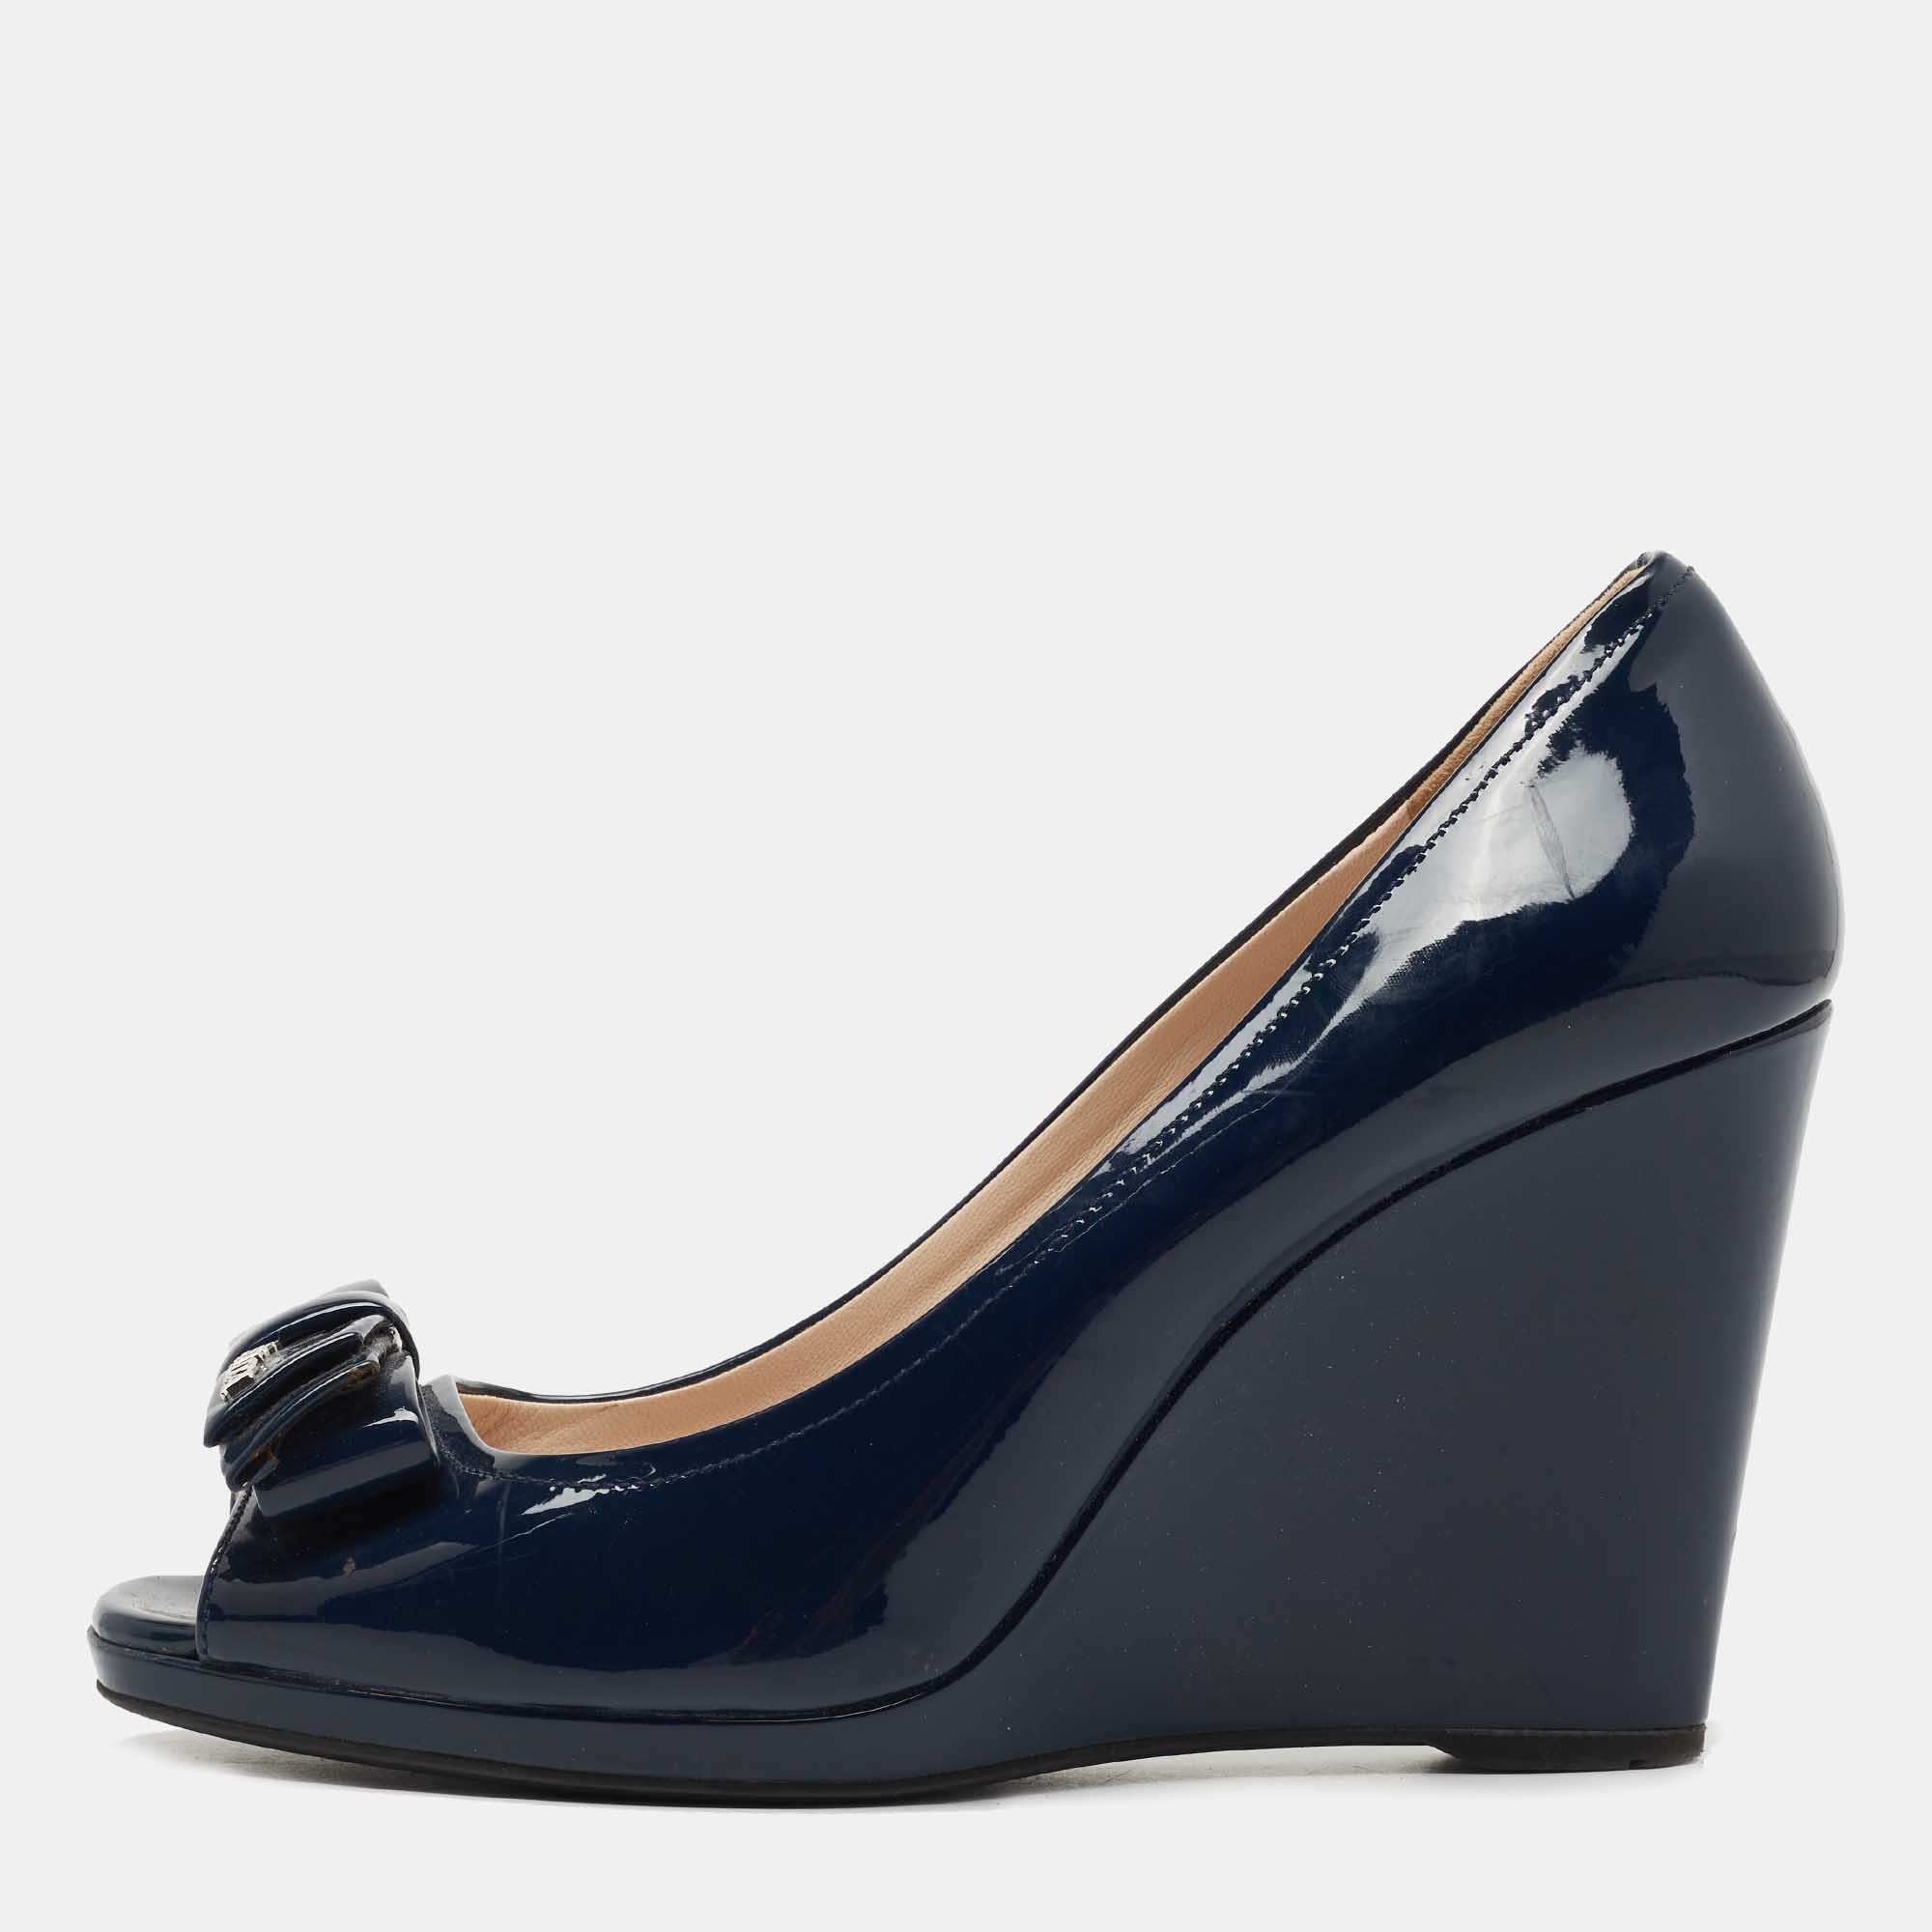 Pre-owned Prada Navy Blue Patent Leather Bow Peep Toe Wedge Pumps Size 38.5